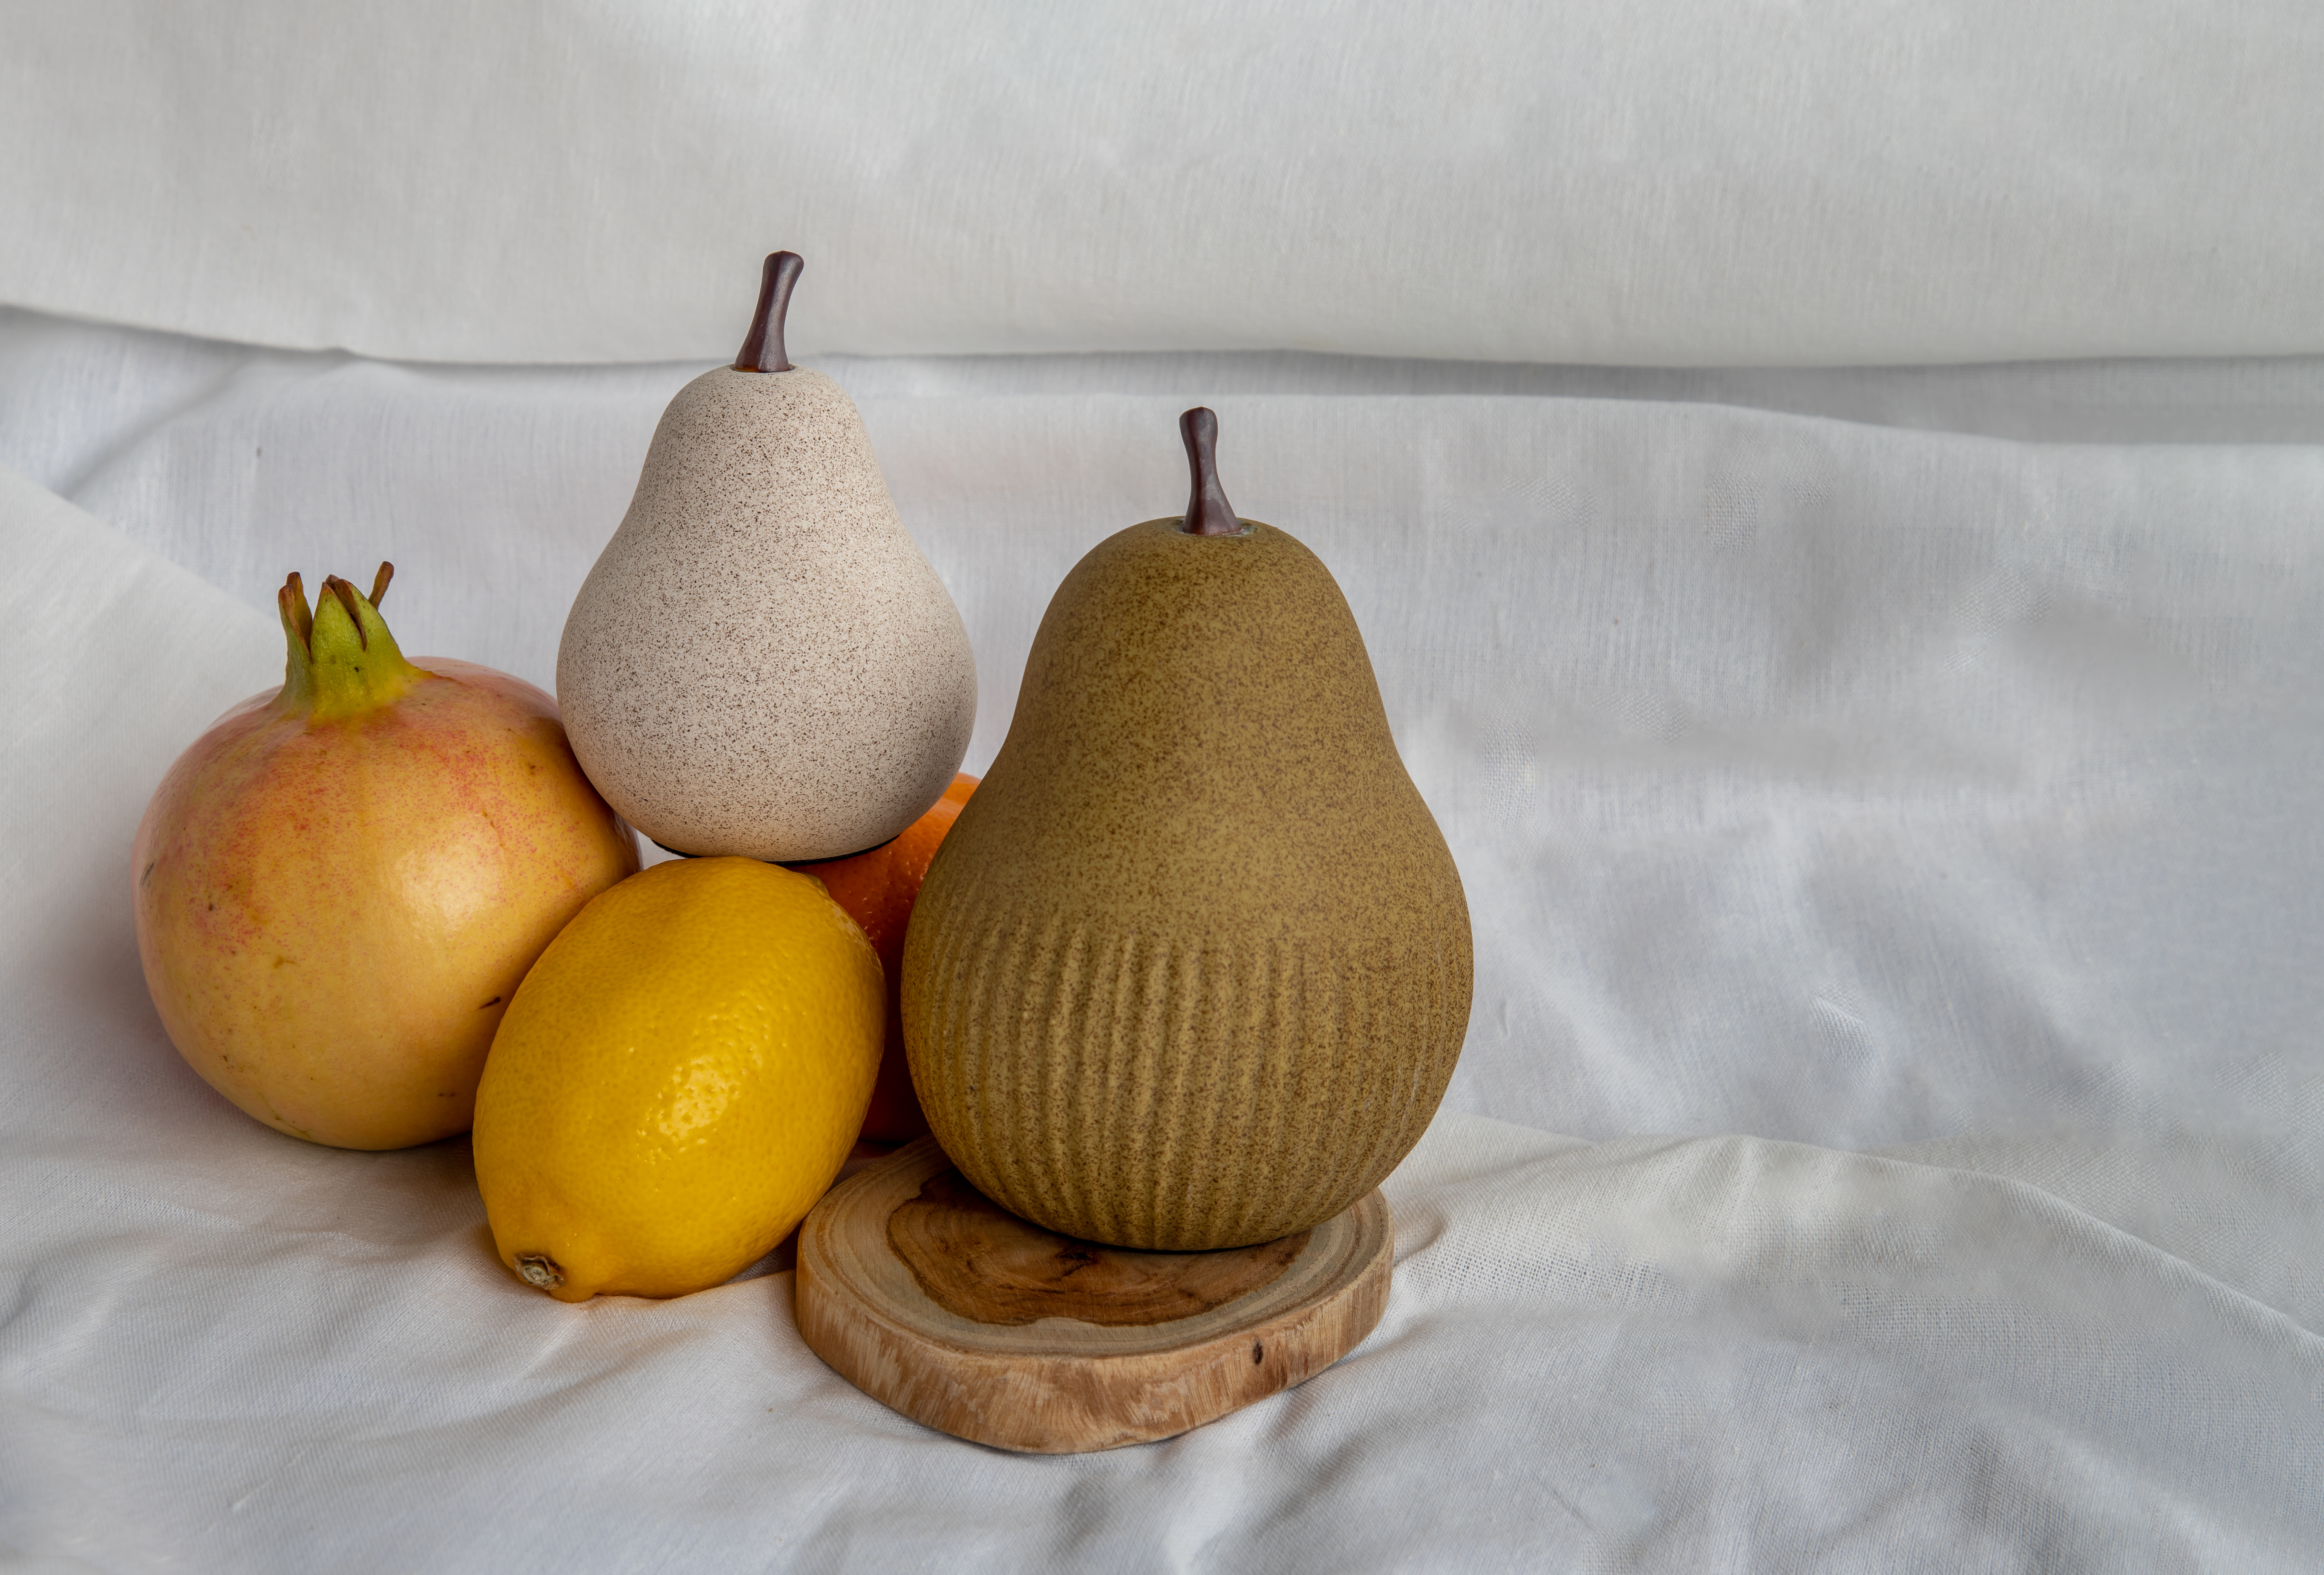 Ceramic pears with a lemon and pomegranate | Source: Shutterstock